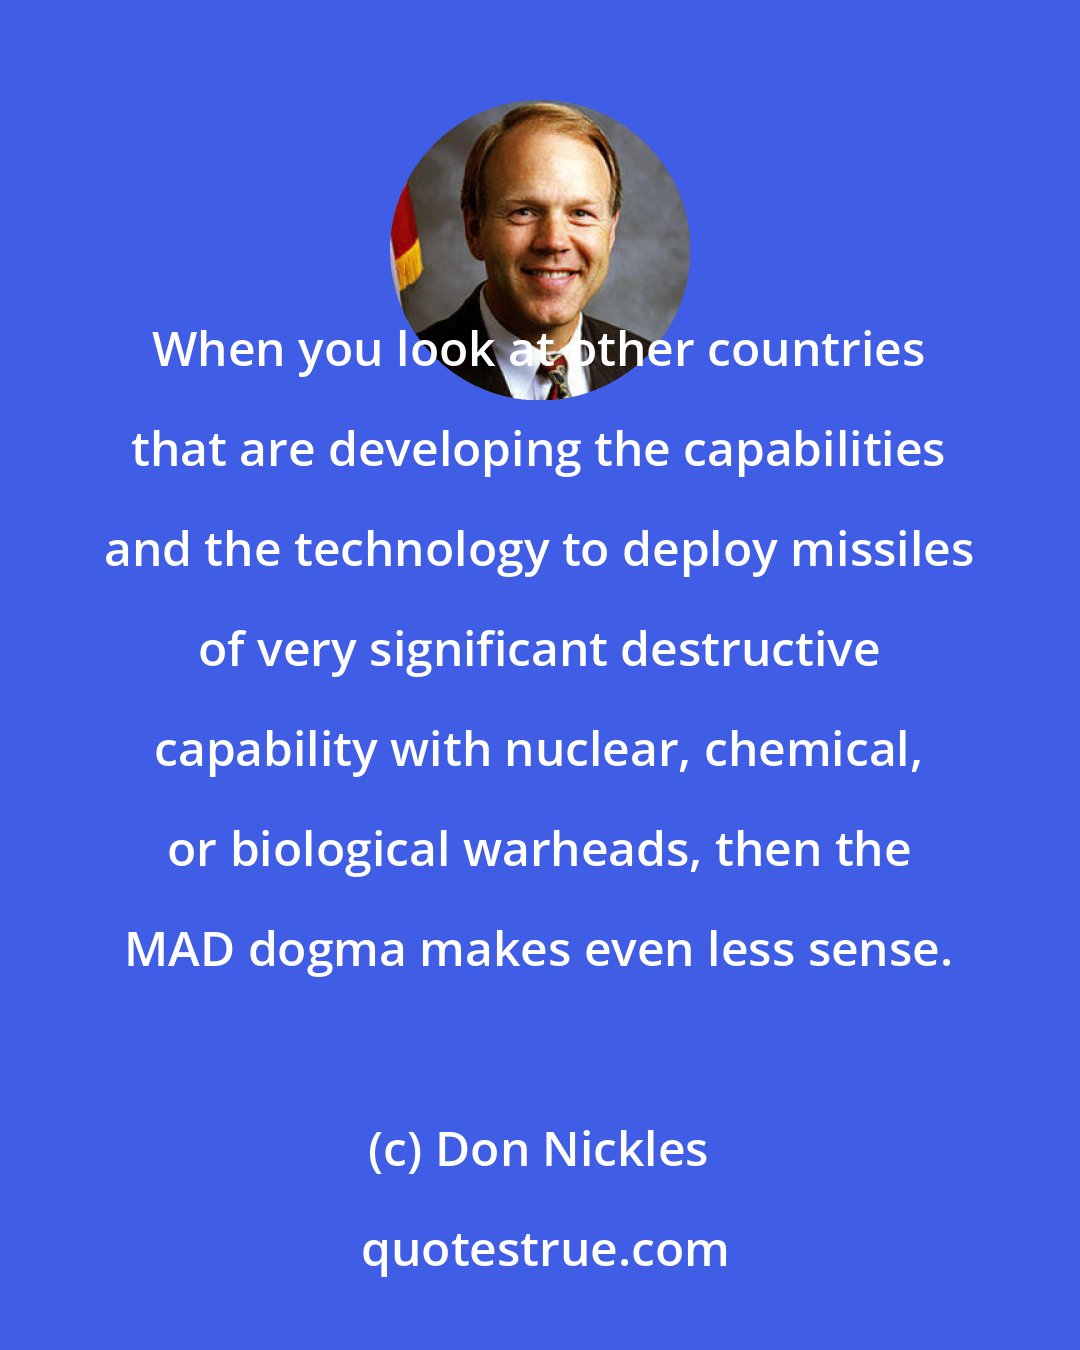 Don Nickles: When you look at other countries that are developing the capabilities and the technology to deploy missiles of very significant destructive capability with nuclear, chemical, or biological warheads, then the MAD dogma makes even less sense.